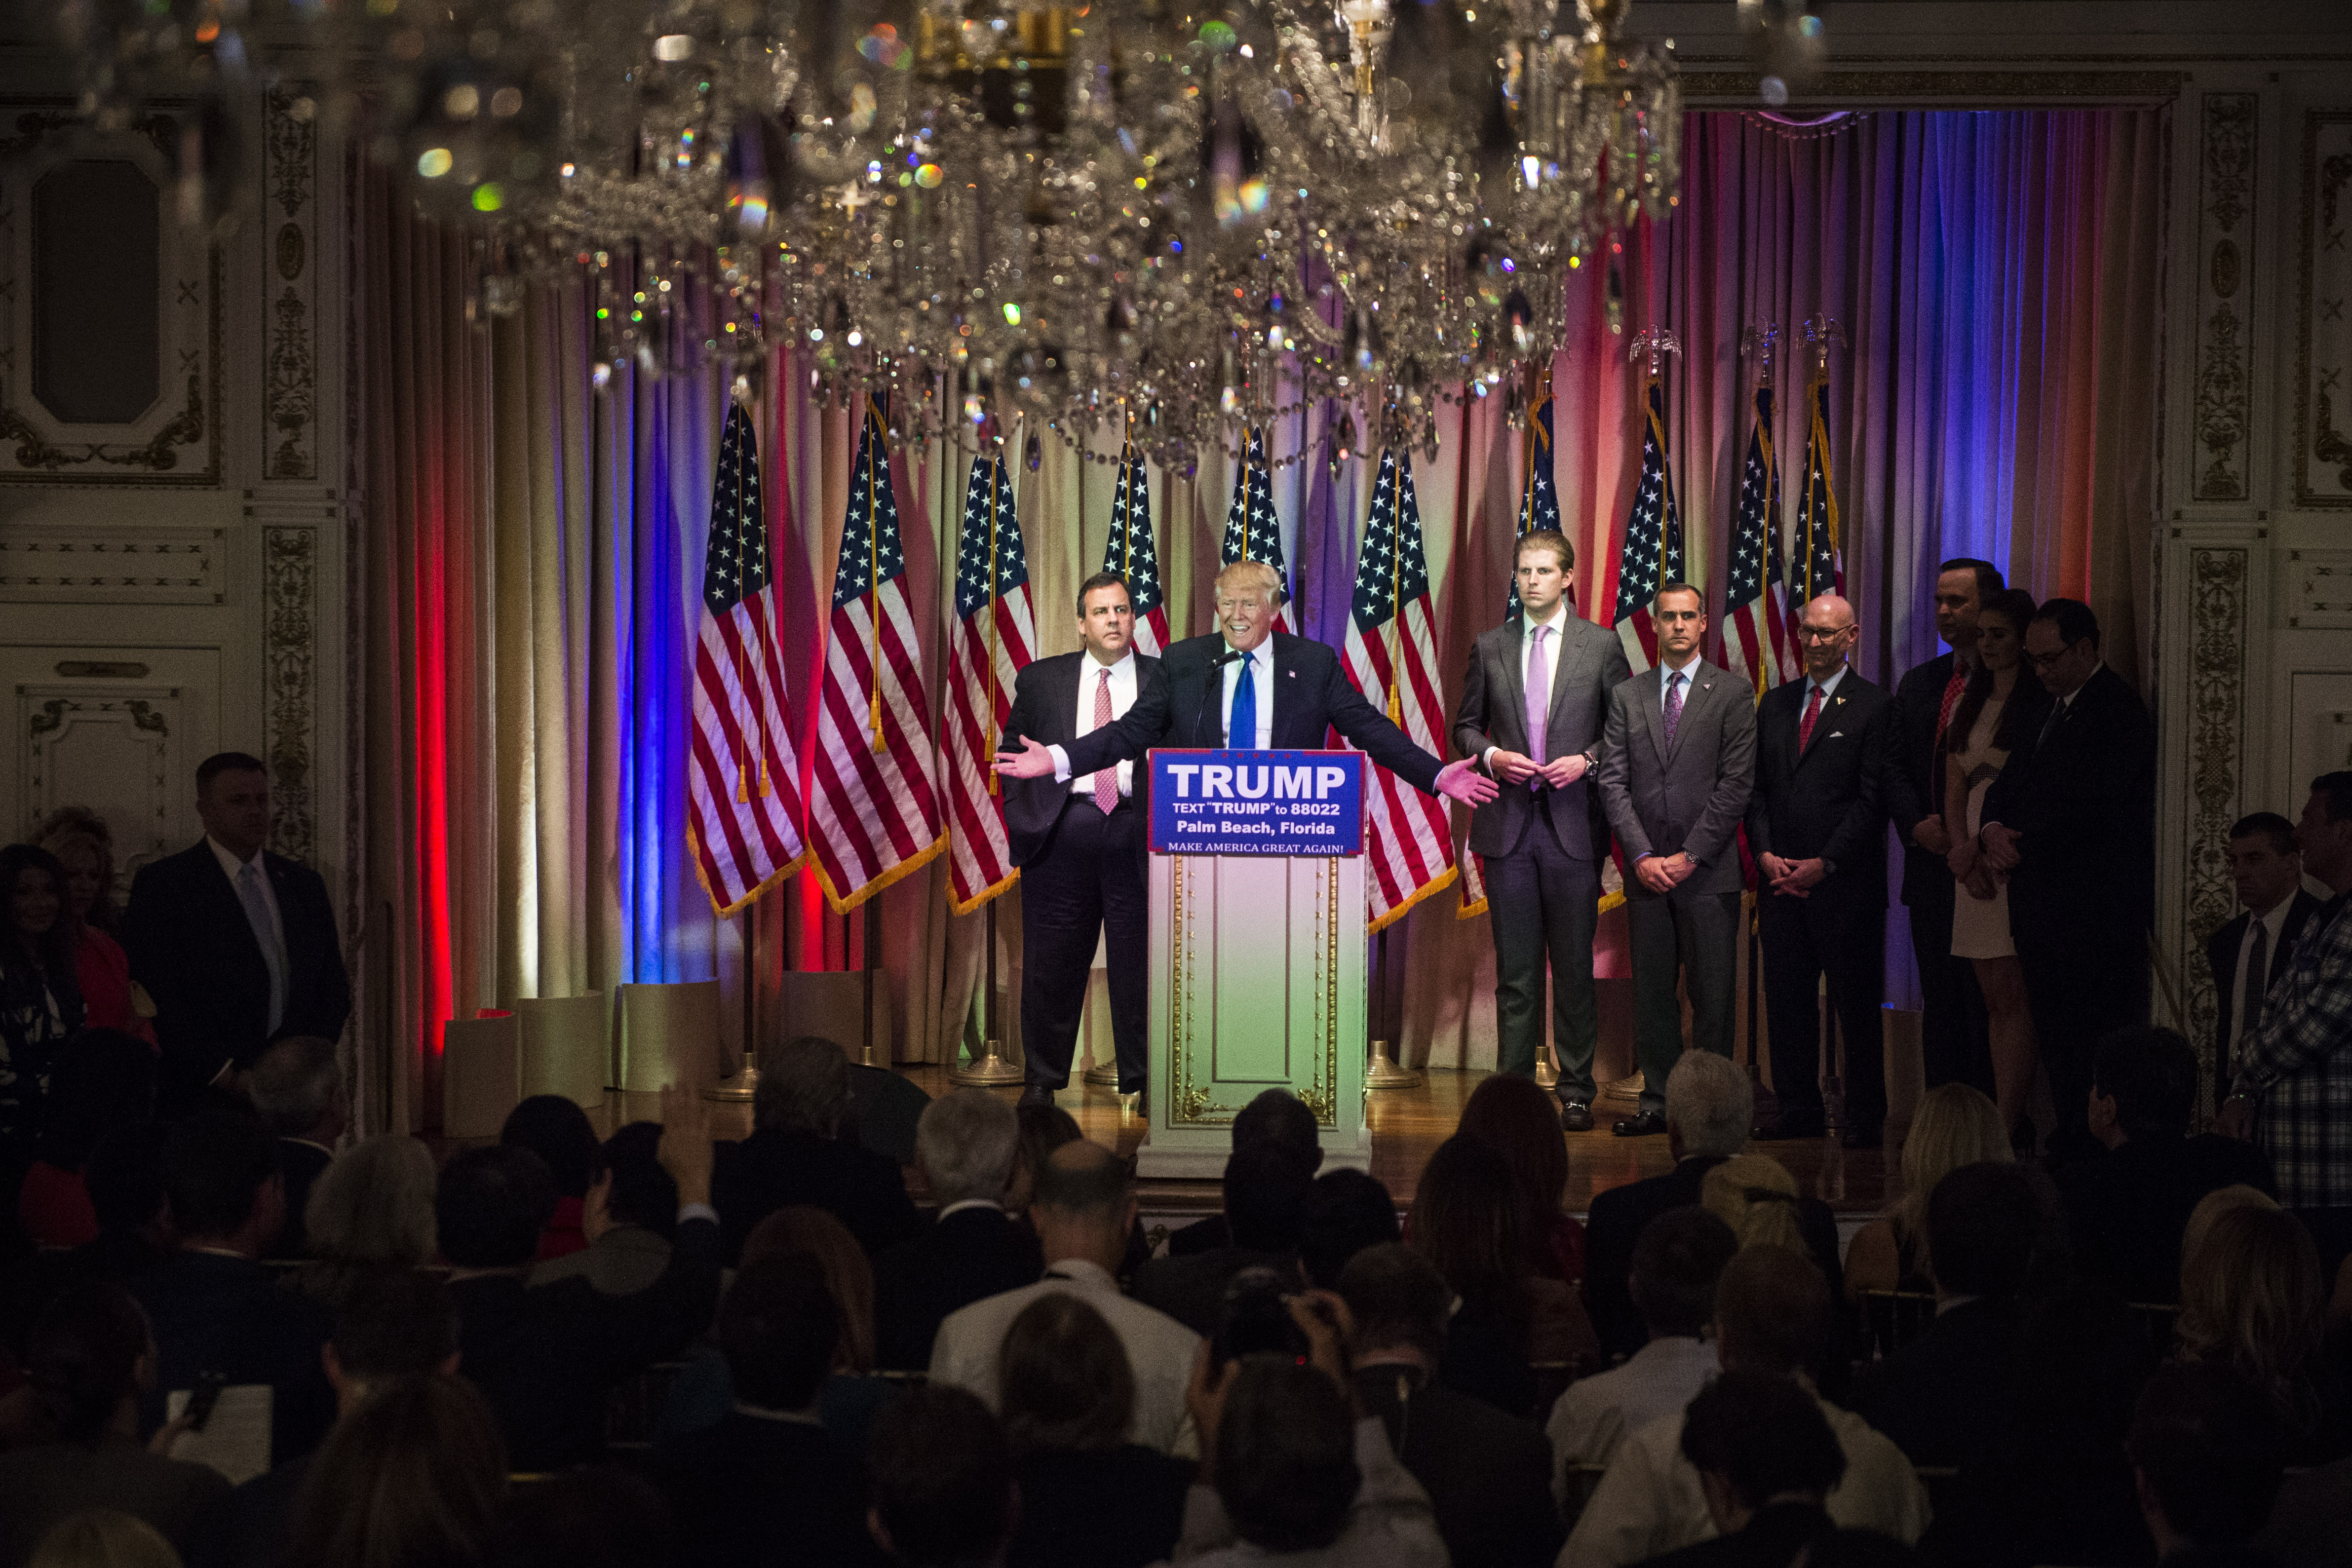 Republican presidential candidate Donald Trump speaks, alongside New Jersey Gov. Chris Christie, left, during a campaign press event at the Mar-A-Lago Club in Palm Beach, FL on Mar. 1, 2016. (Jabin Botsford—The Washington Post//Getty Images)